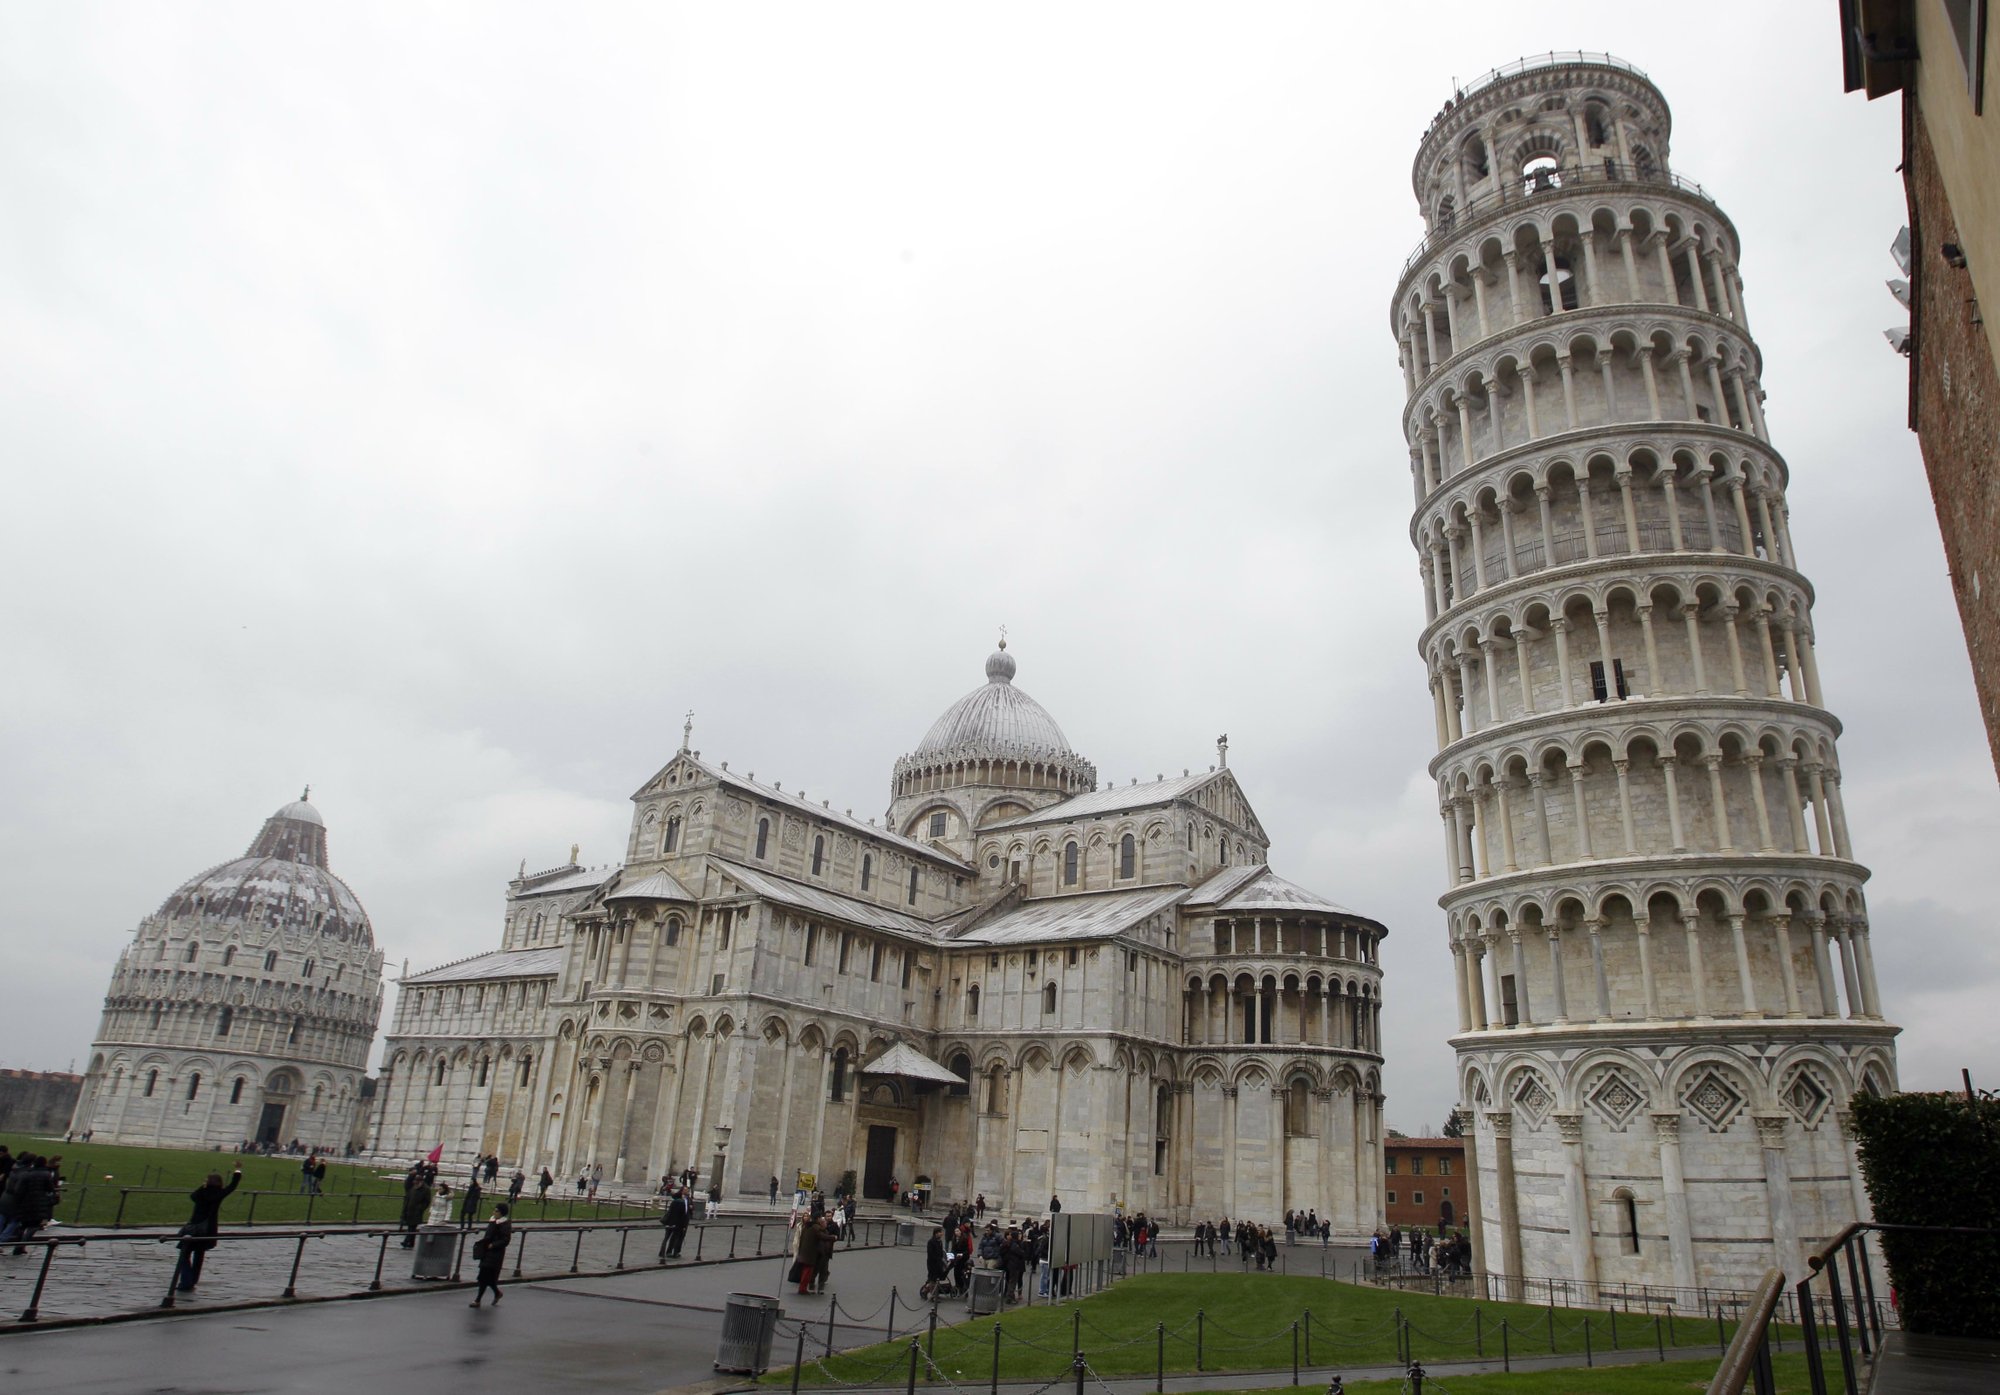 The Leaning Tower of Pisa (Torre di Pisa) is seen at right next to the medieval cathedral of Pisa, in Piazza dei Miracoli Square, in Pisa, Italy, on Sunday, Jan. 2, 2012. Photo: AP